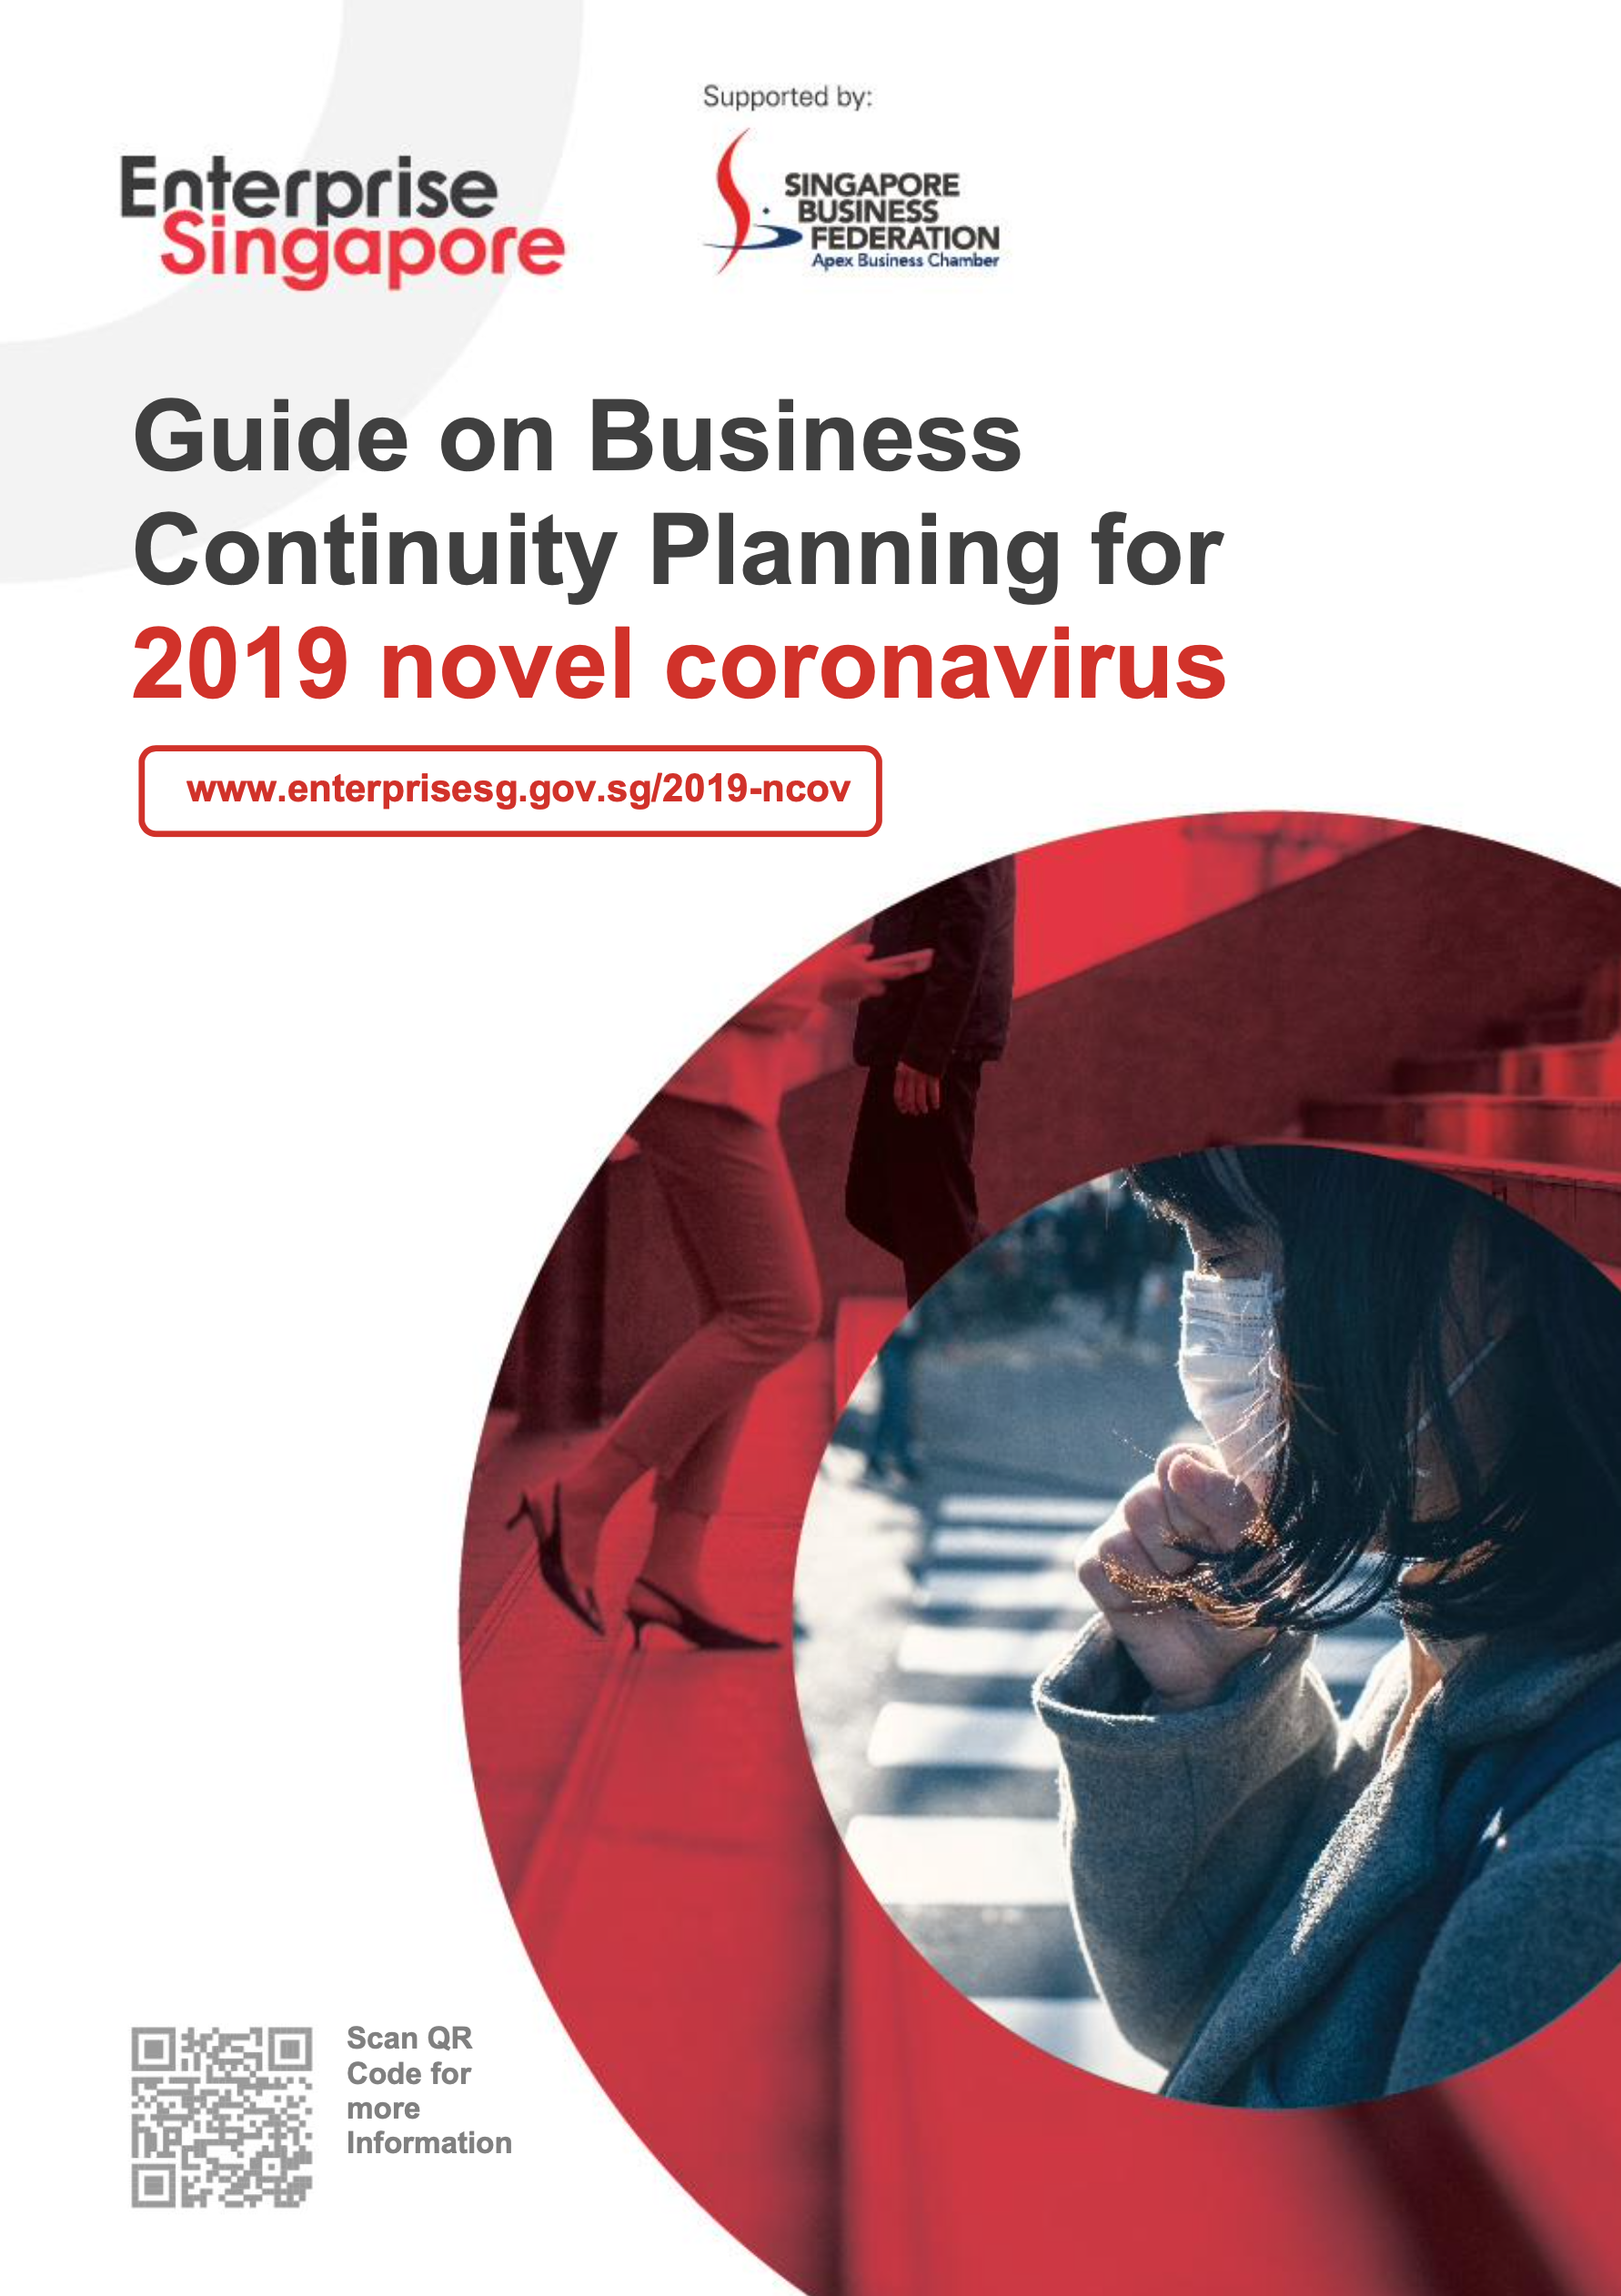 Featured image for “Guide on Business Continuity Planning for 2019 novel coronavirus”